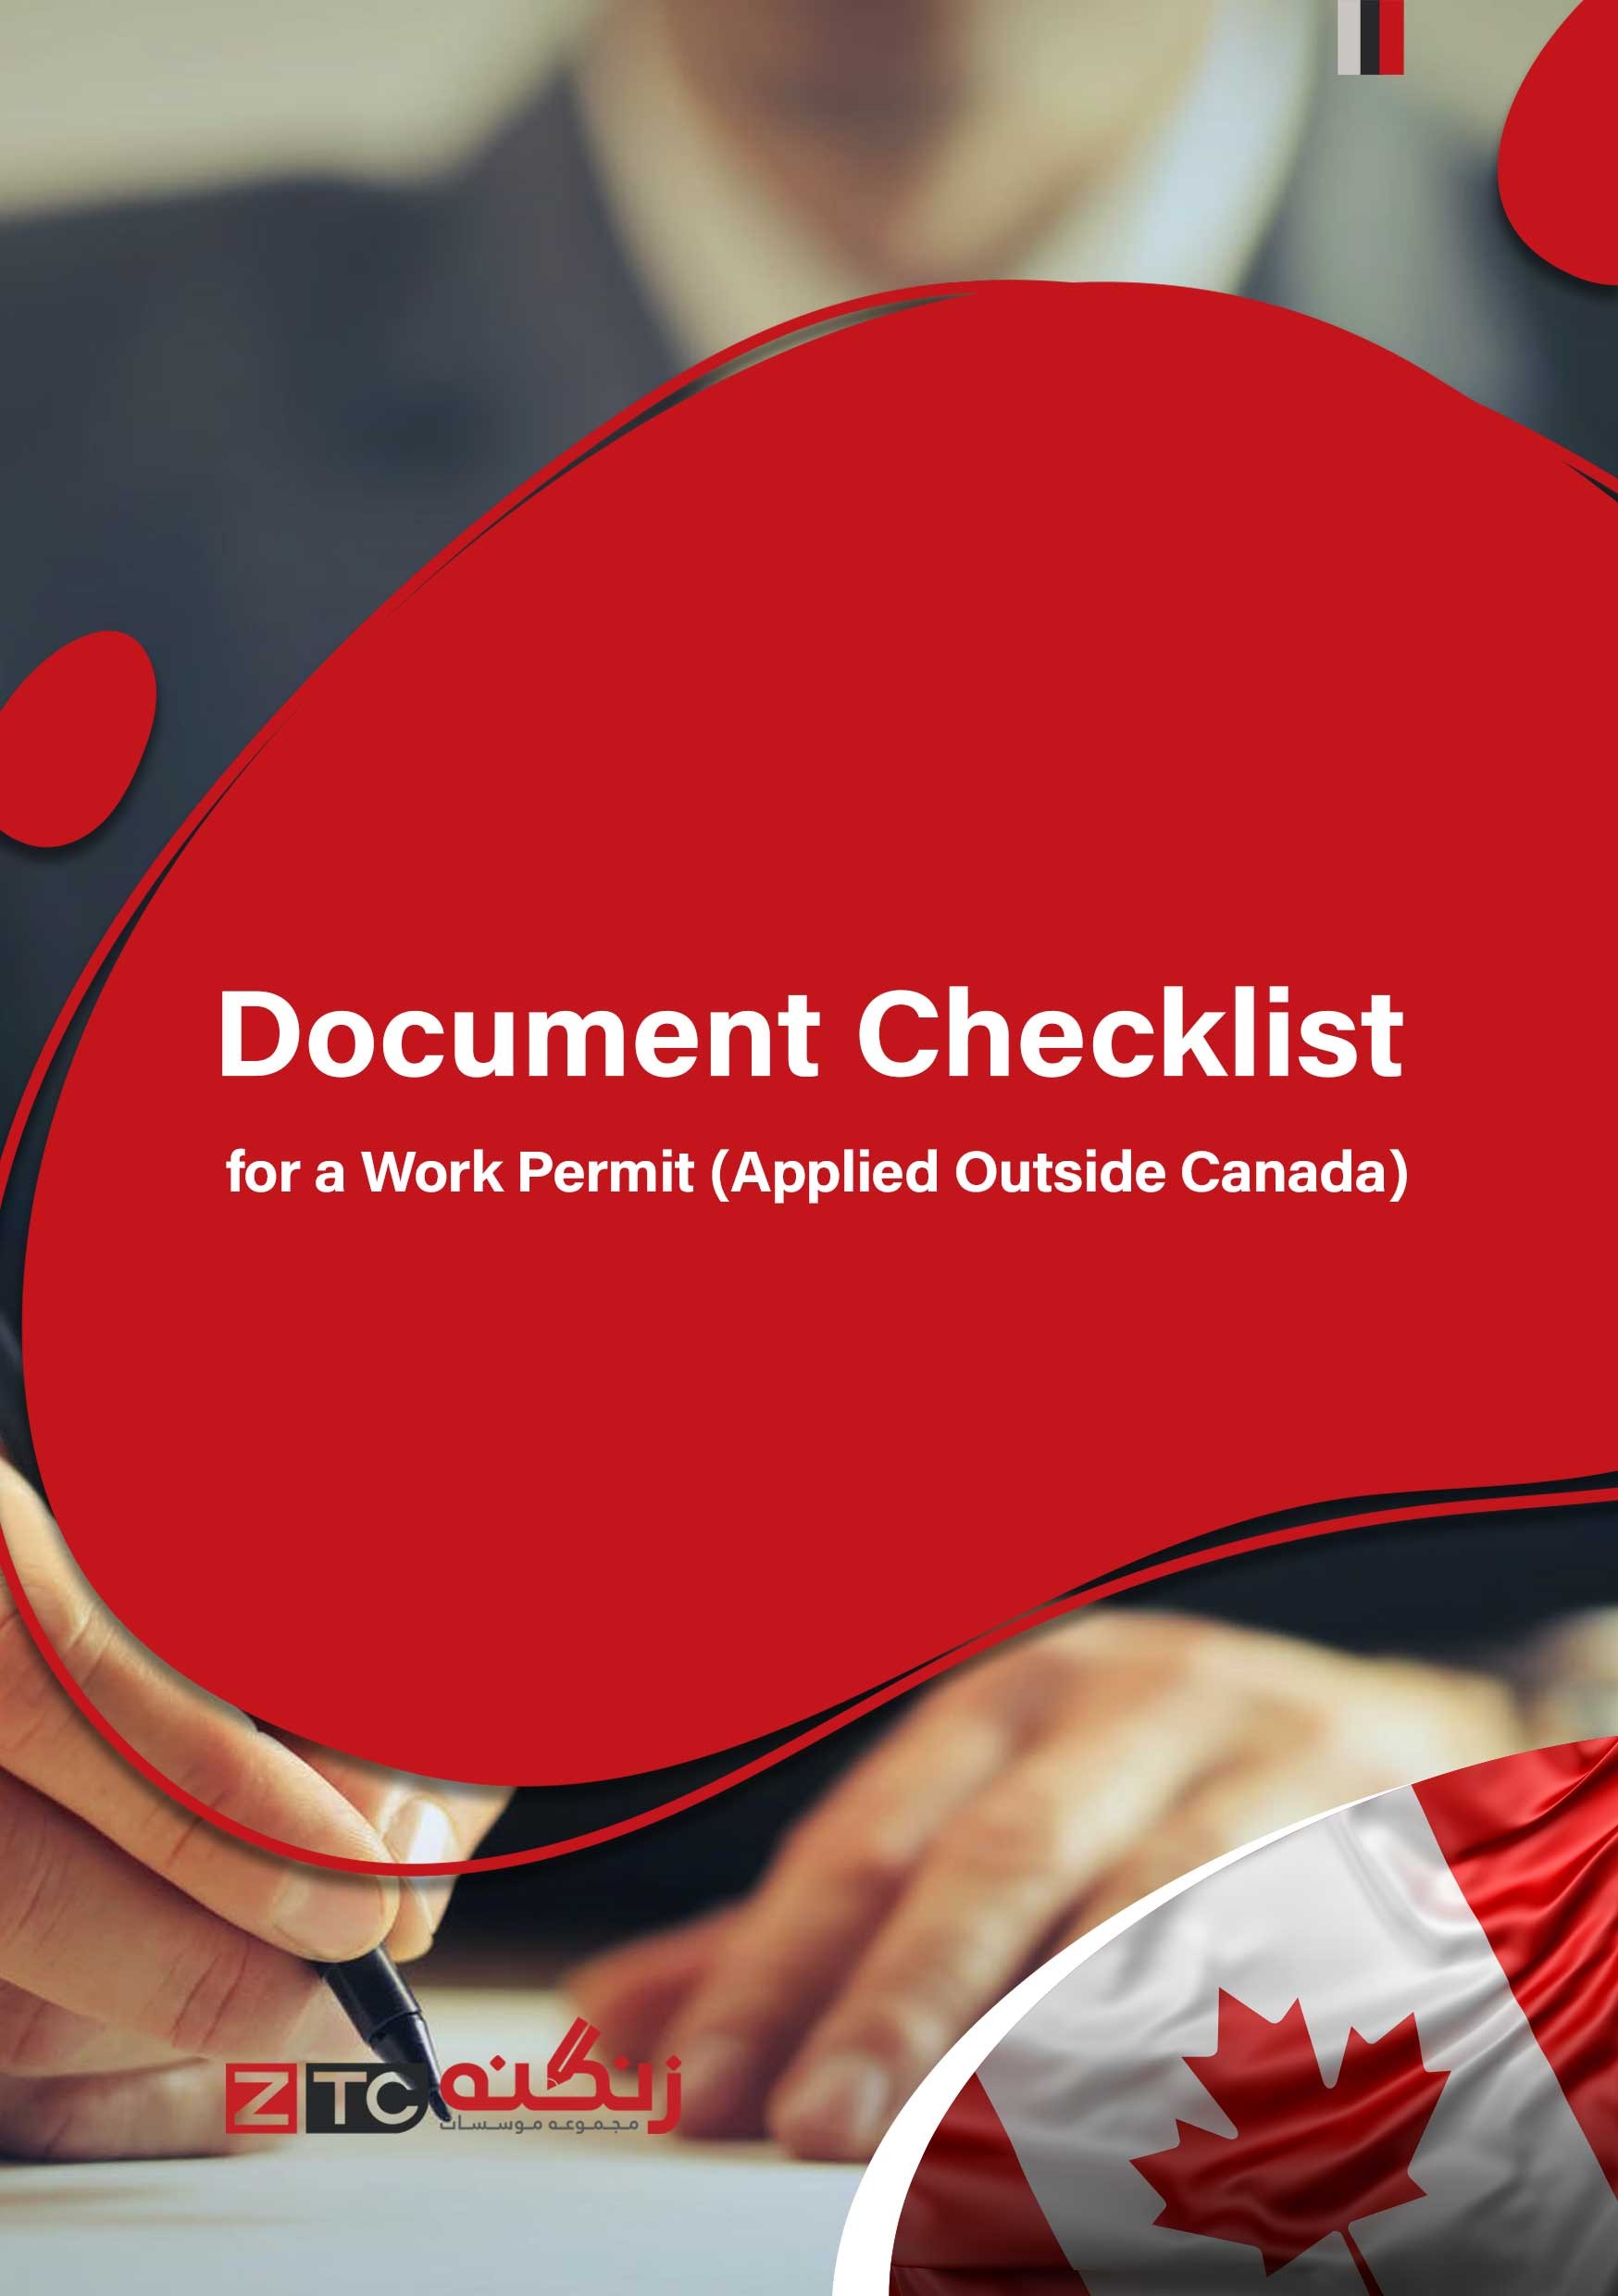 Document Checklist for a Work Permit (Applied Outside Canada)